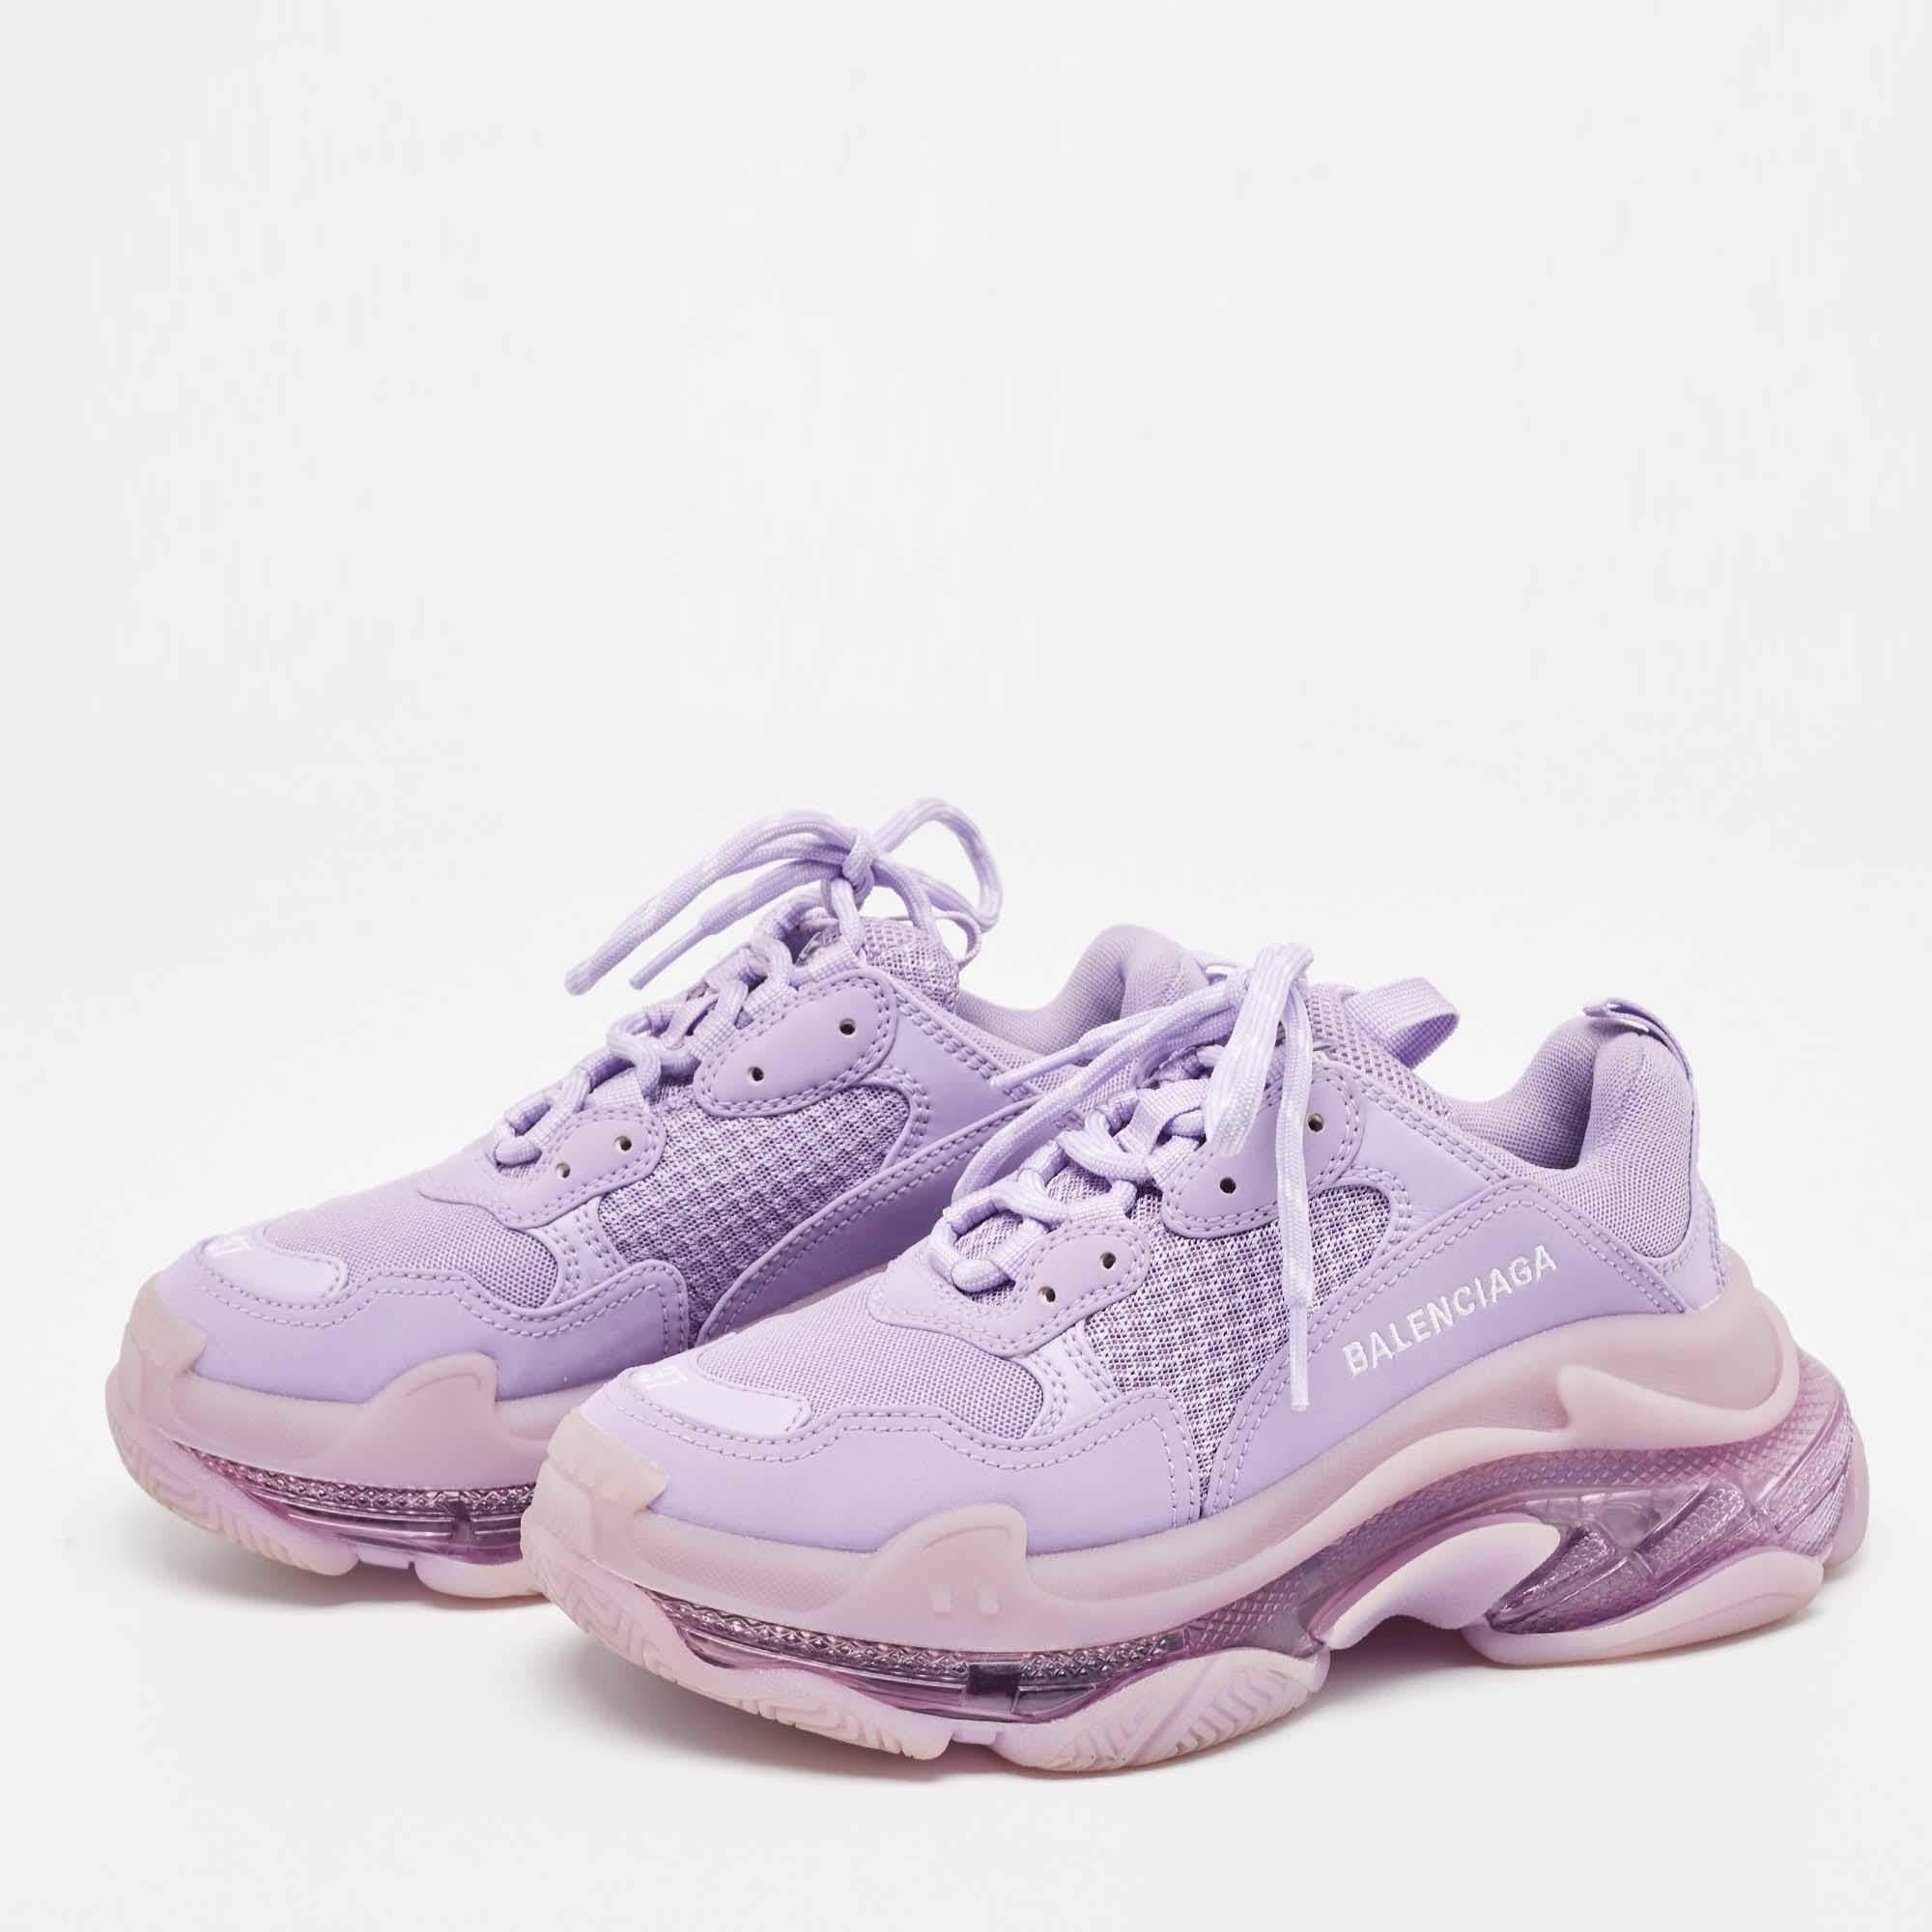 Balenciaga Purple Mesh and Leather Triple S Clear Sole Sneakers Size 37 4